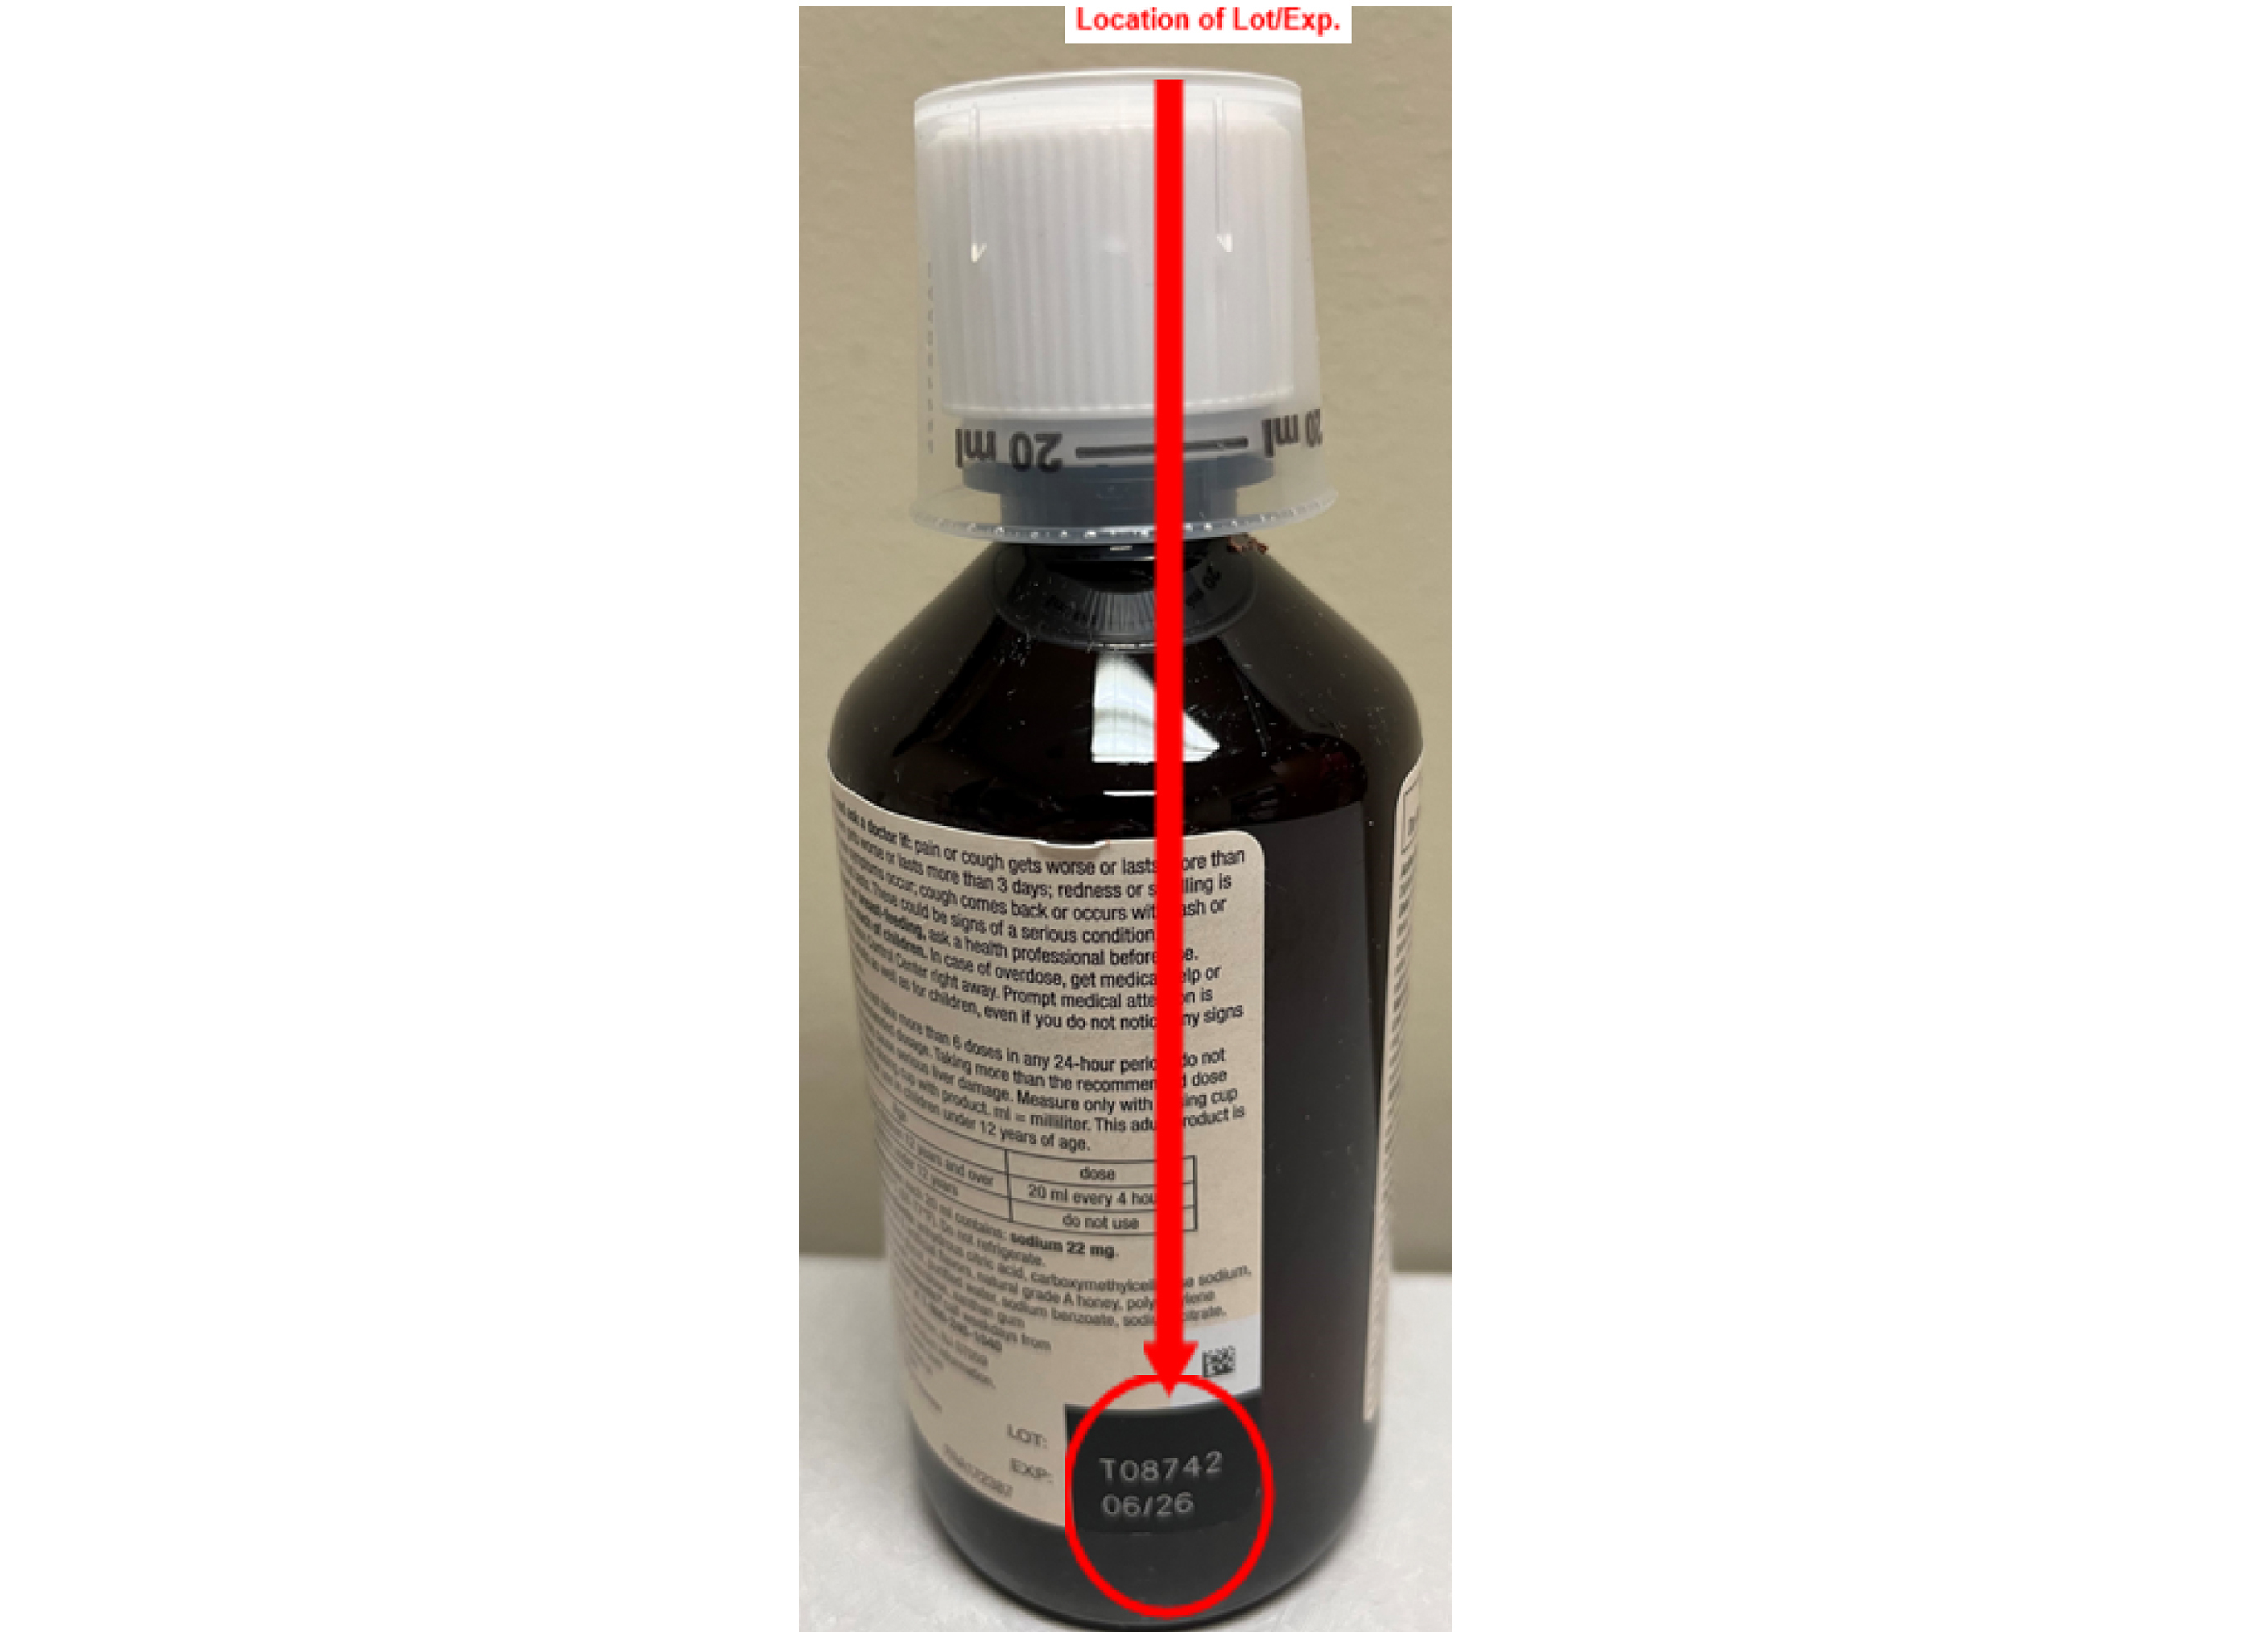 Robitussin Cough Syrup Is Recalled Due to Contamination